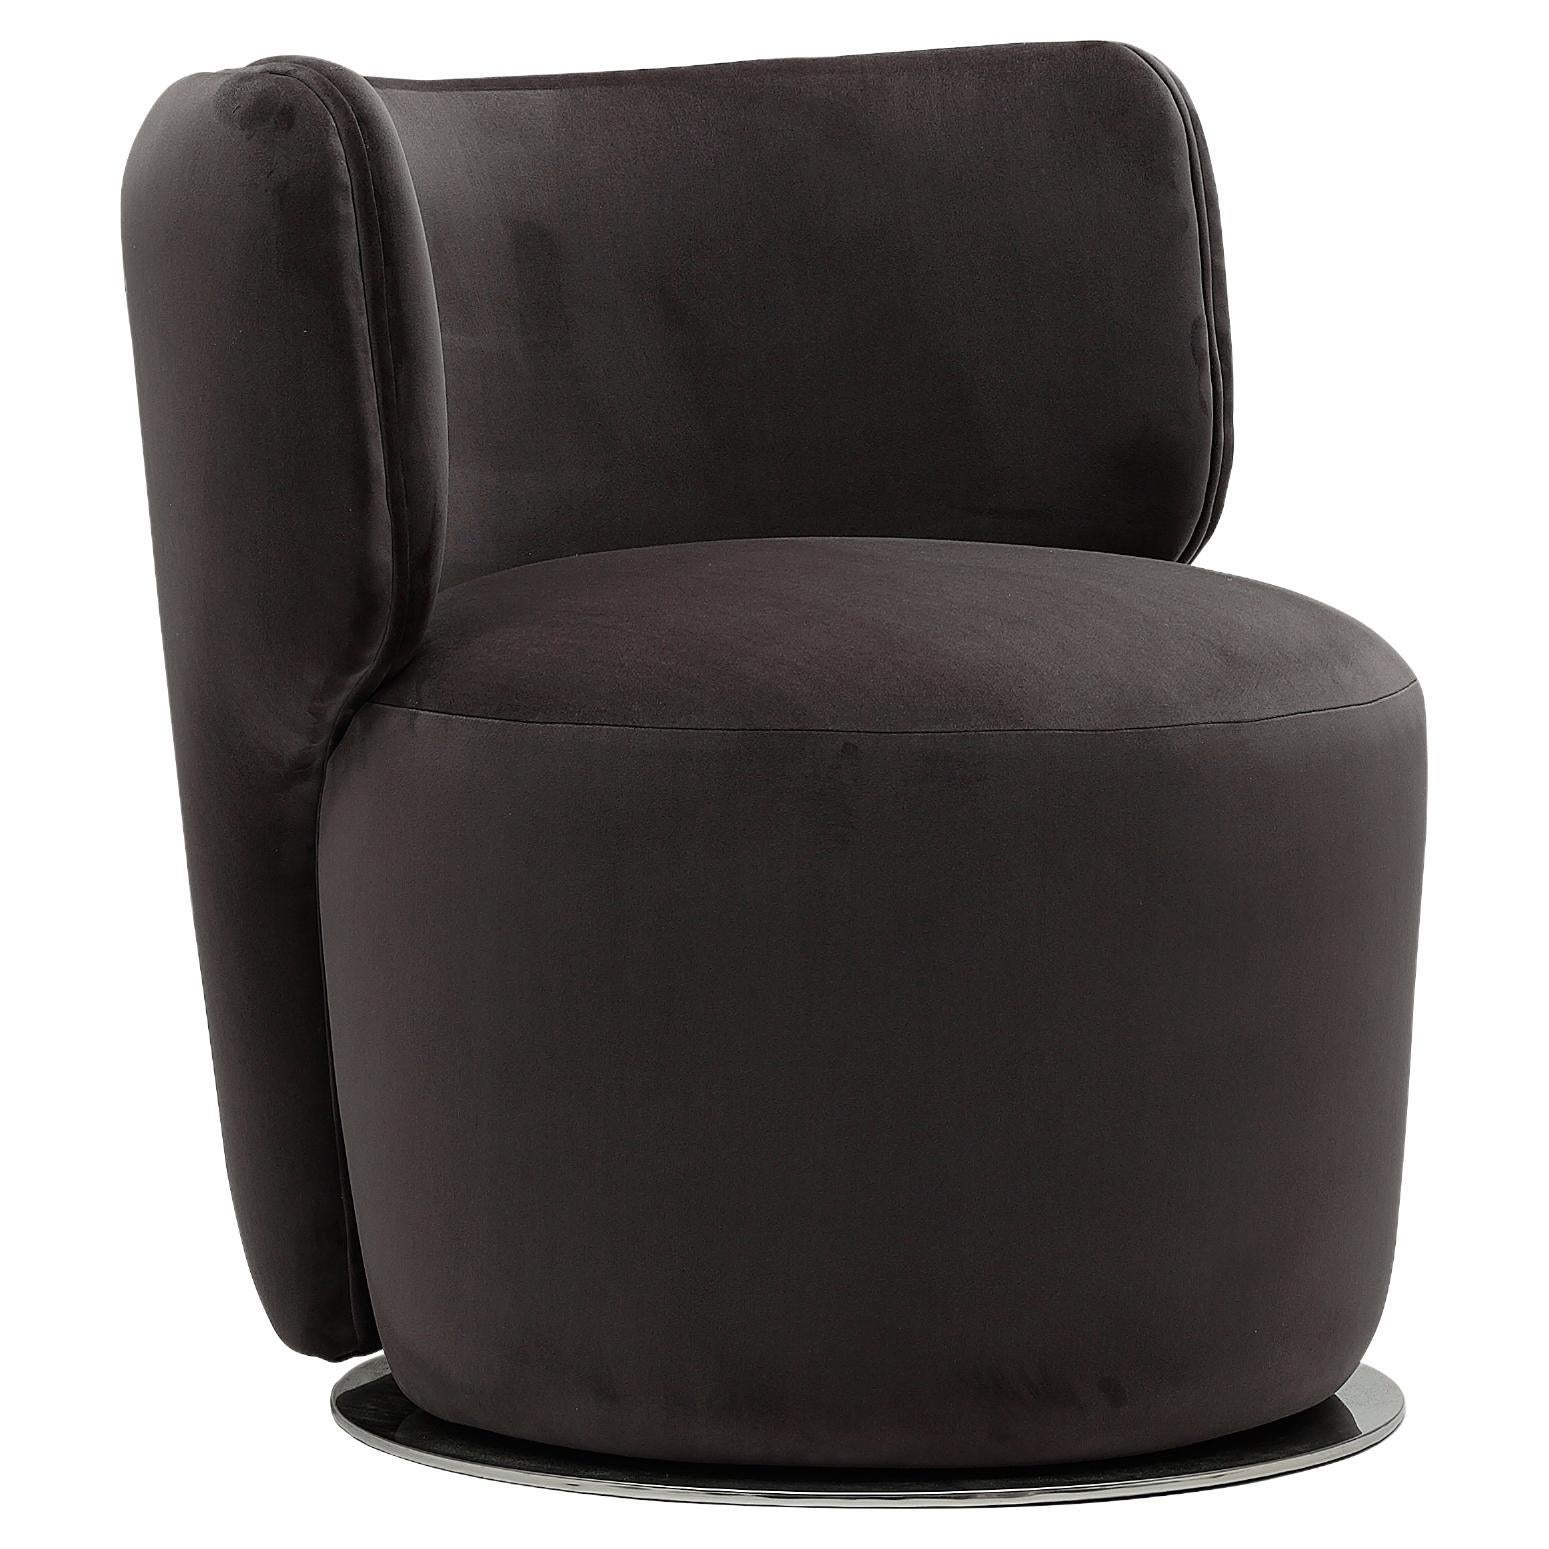 Sierra armchair, wood frame, leather/fabric upholstery, swivel base met. For Sale